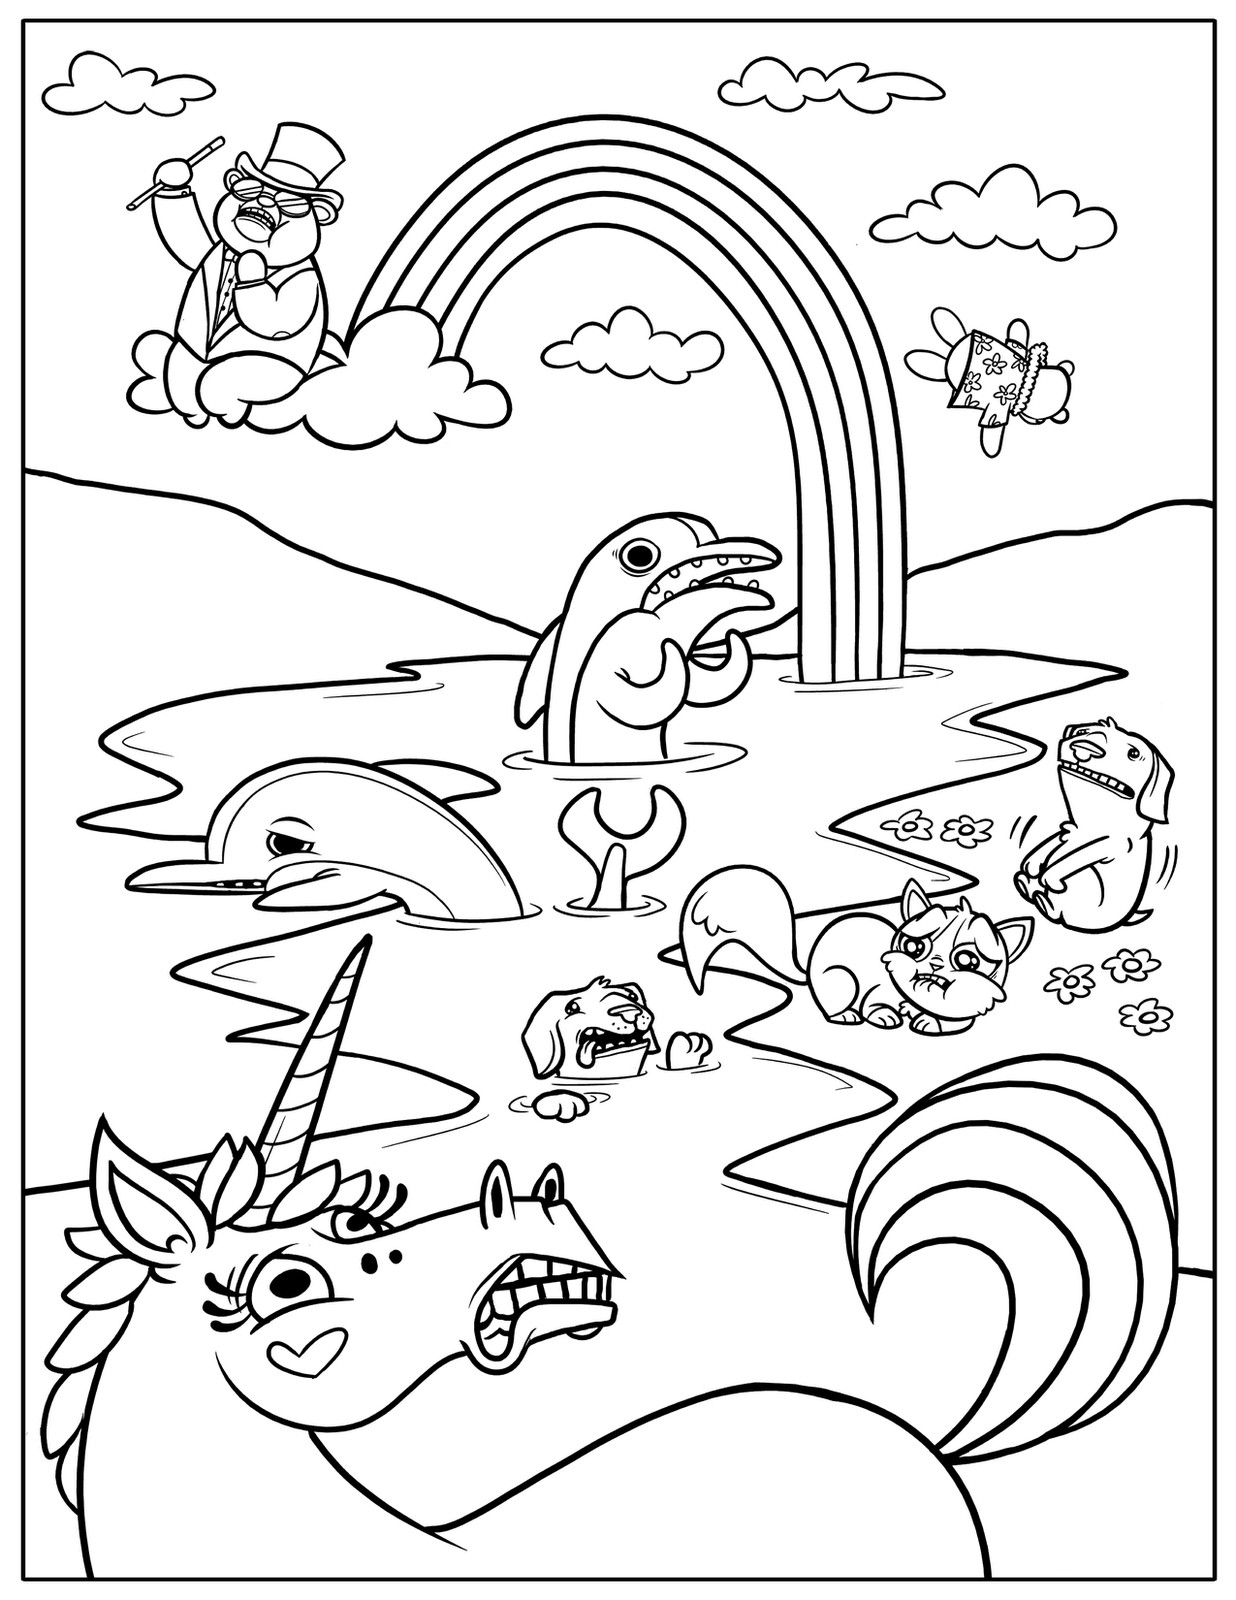 Kids Online Coloring Page
 Free Printable Rainbow Coloring Pages For Kids